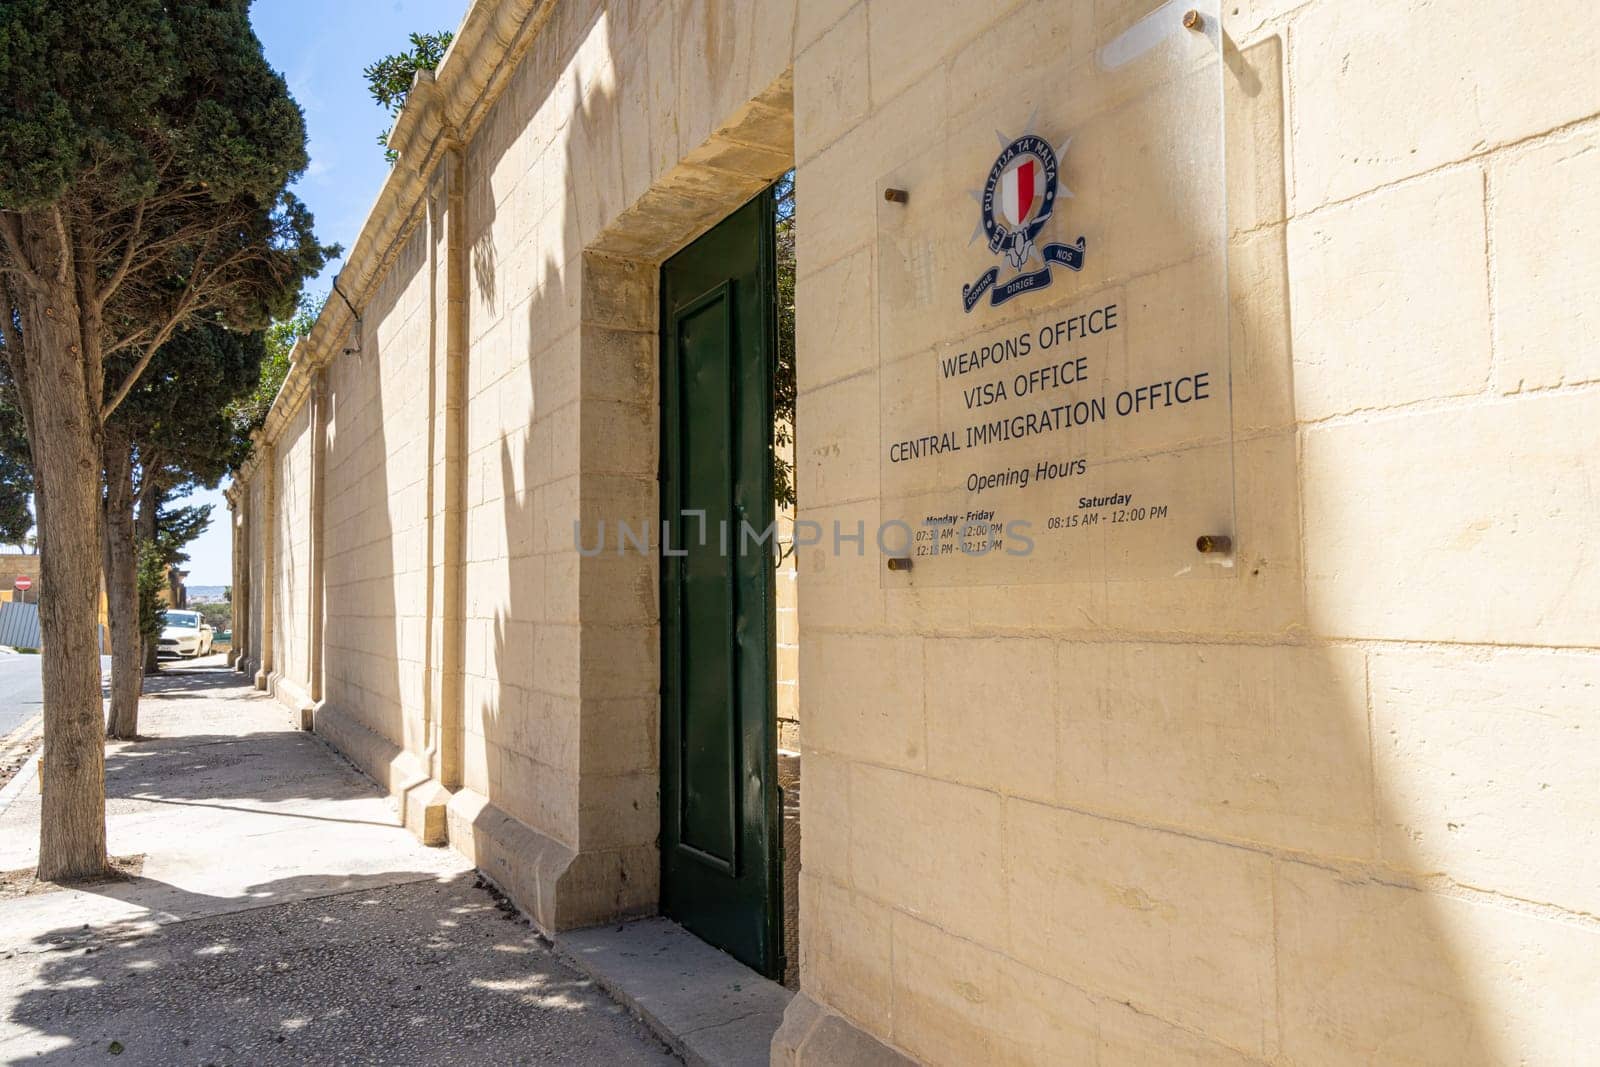 The Central Immigration Office in Valletta, Malta. by sergiodv